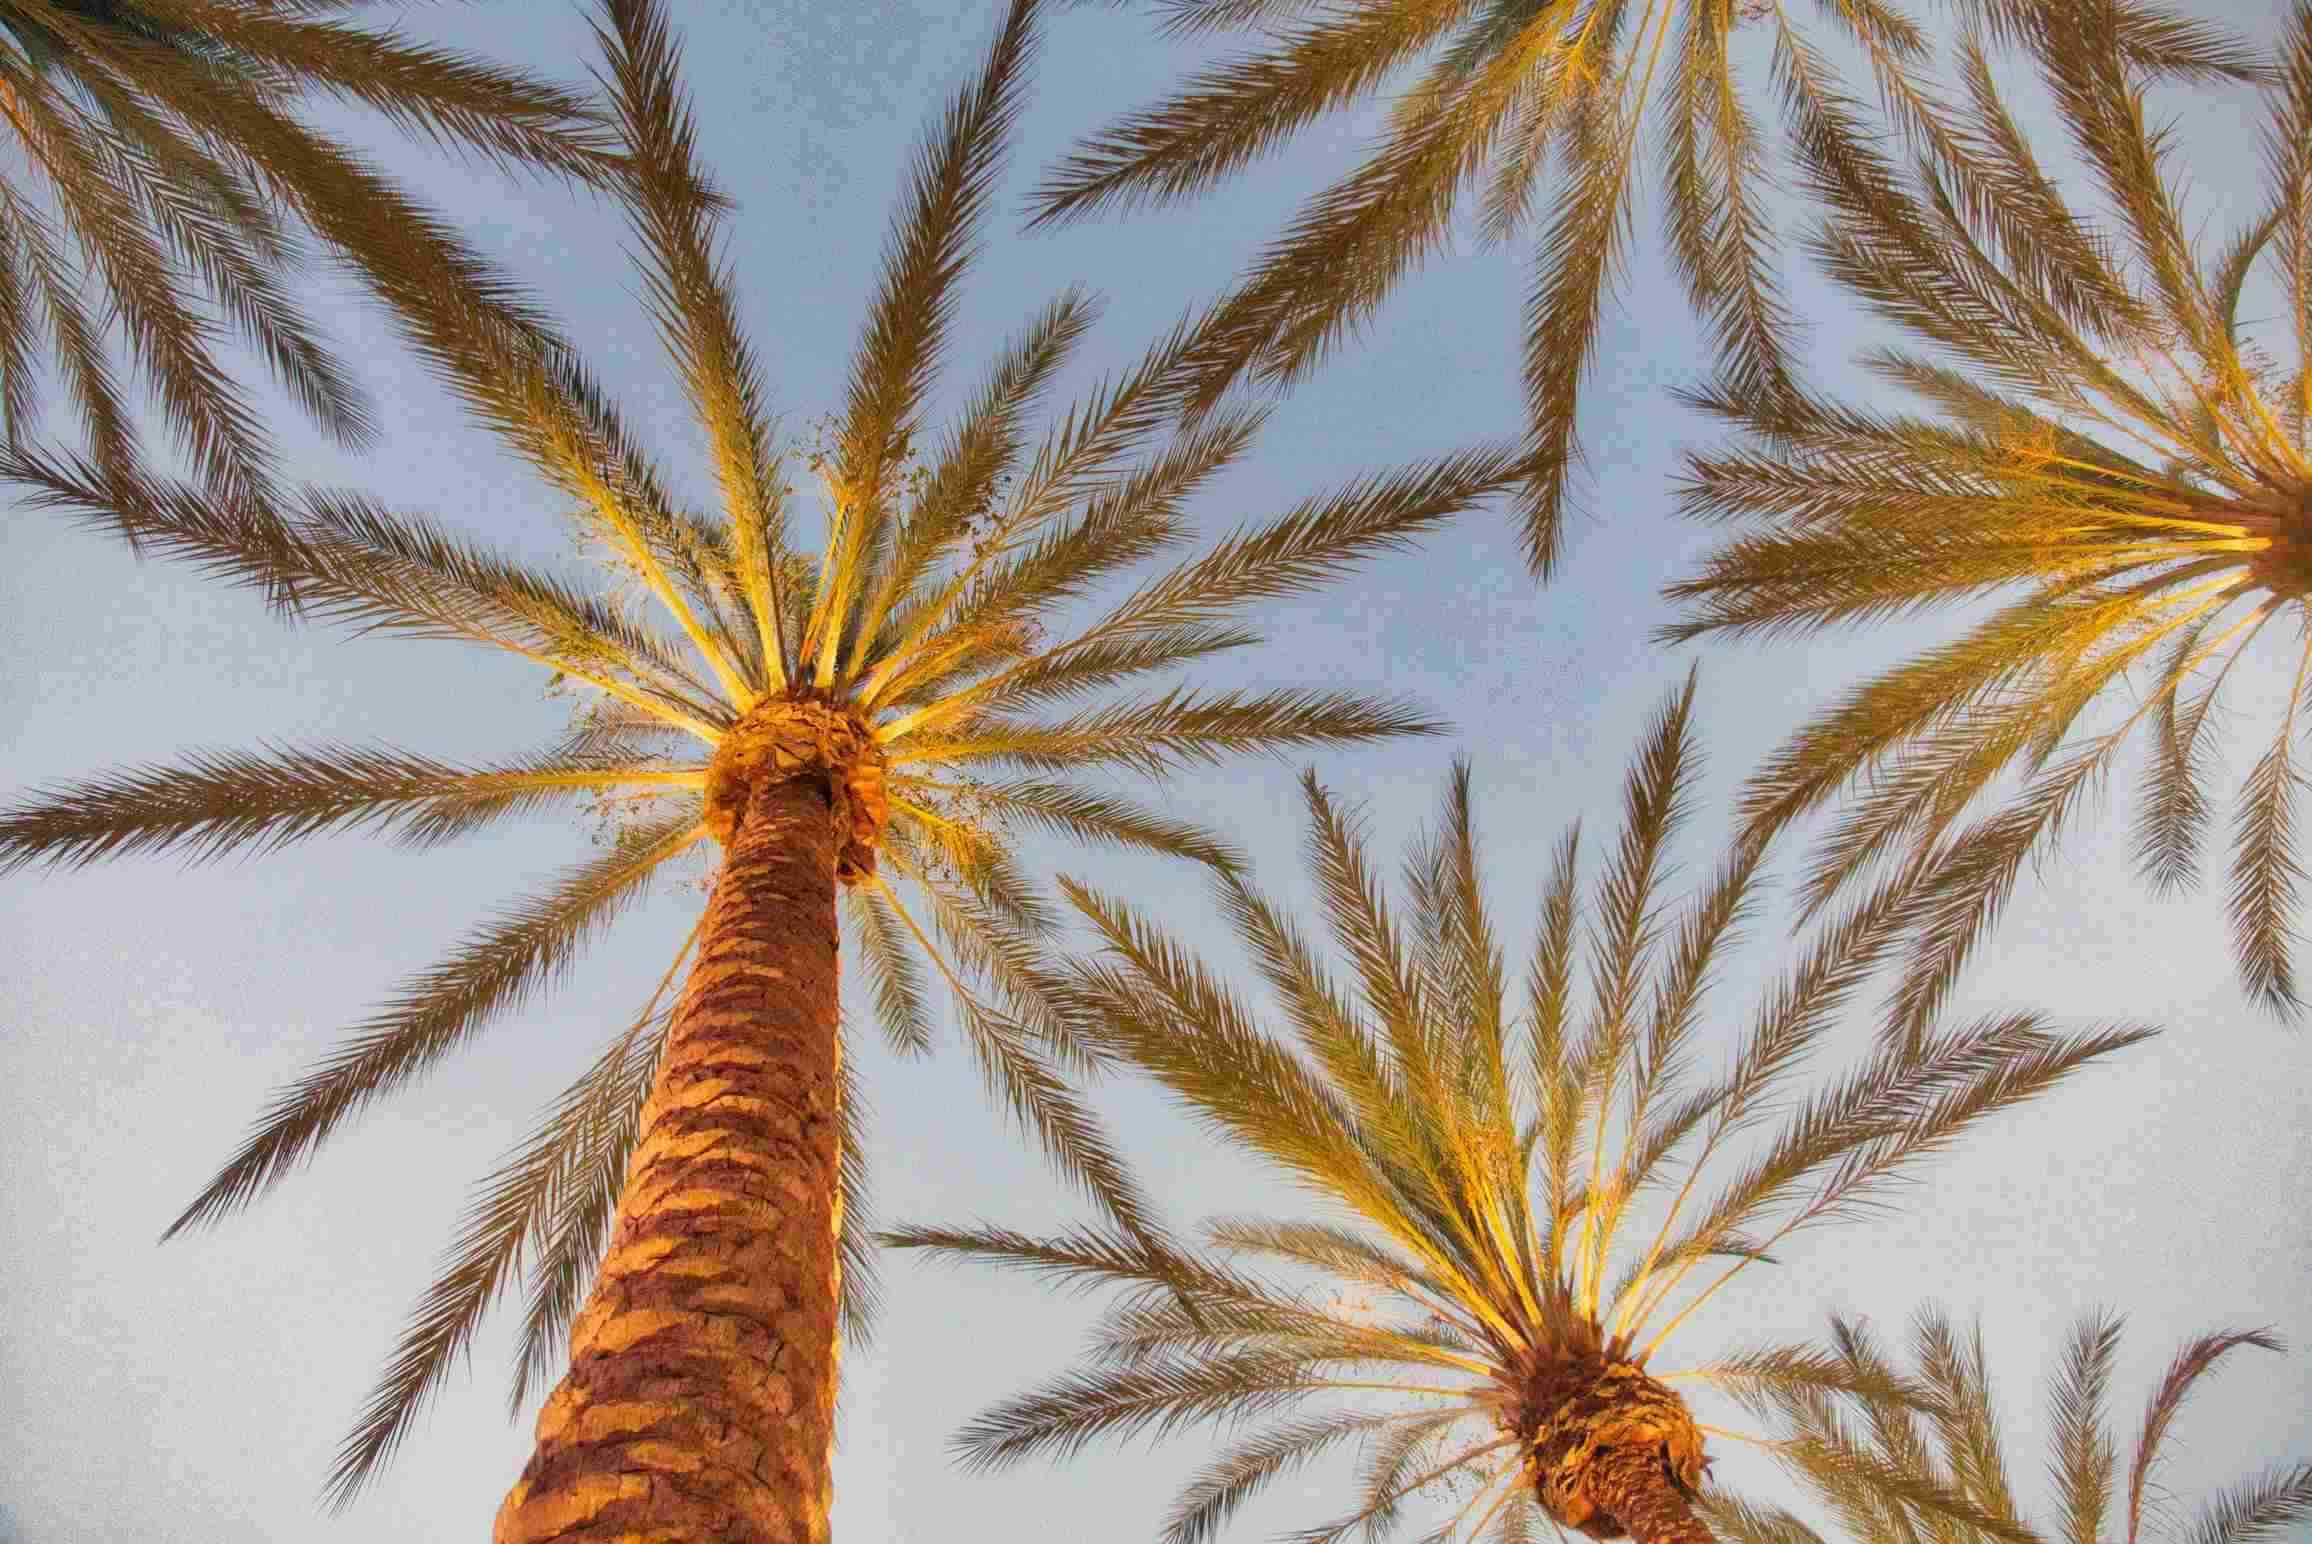 View of Palm Trees. Roseville, California